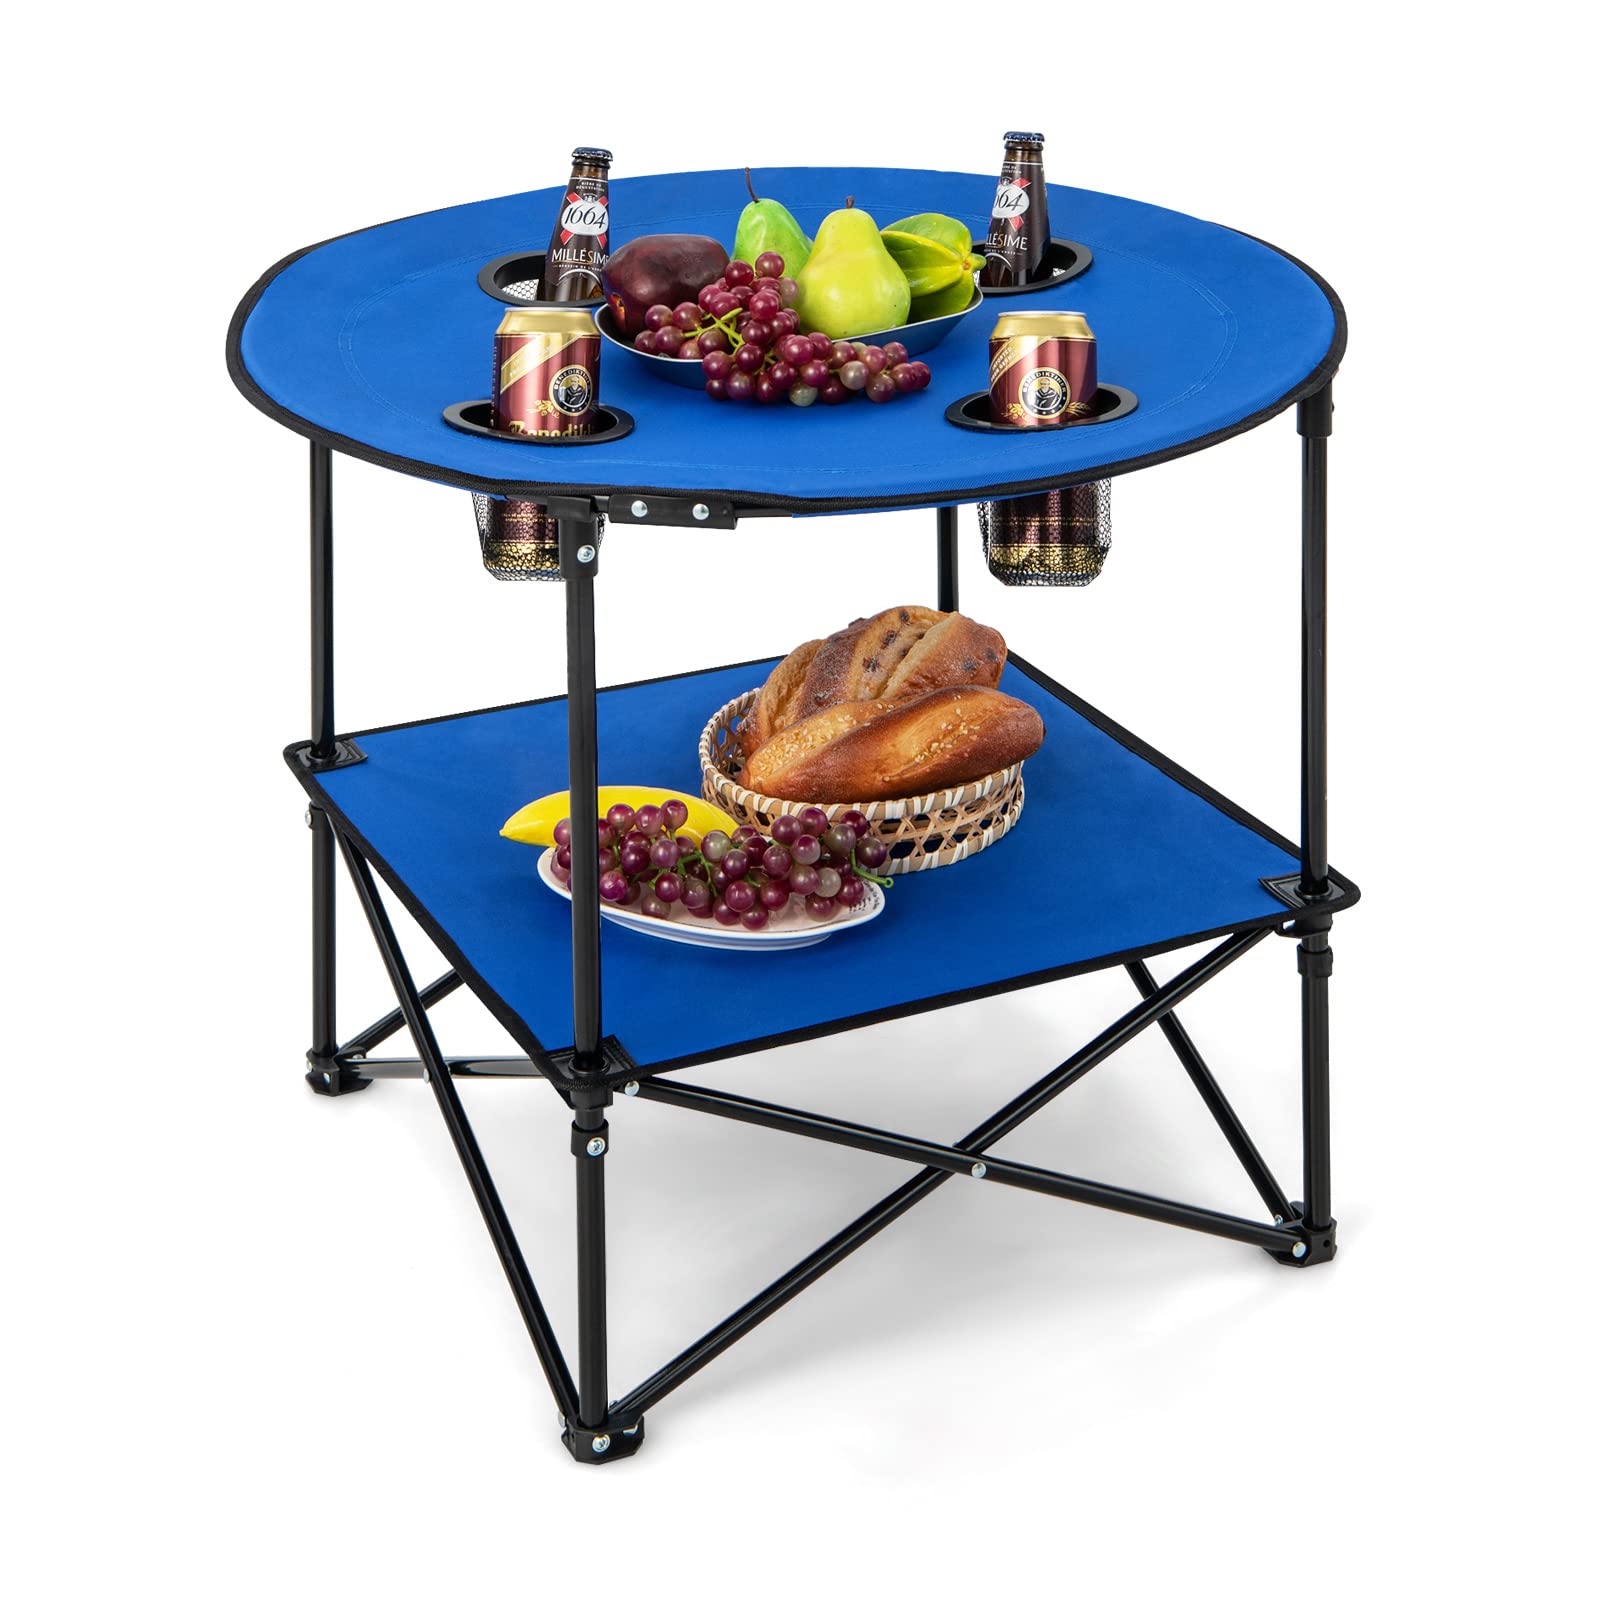 Giantex Folding Camping Table, 2-Tier Portable Picnic Table w/Carrying Bag, 4 Cup Holders